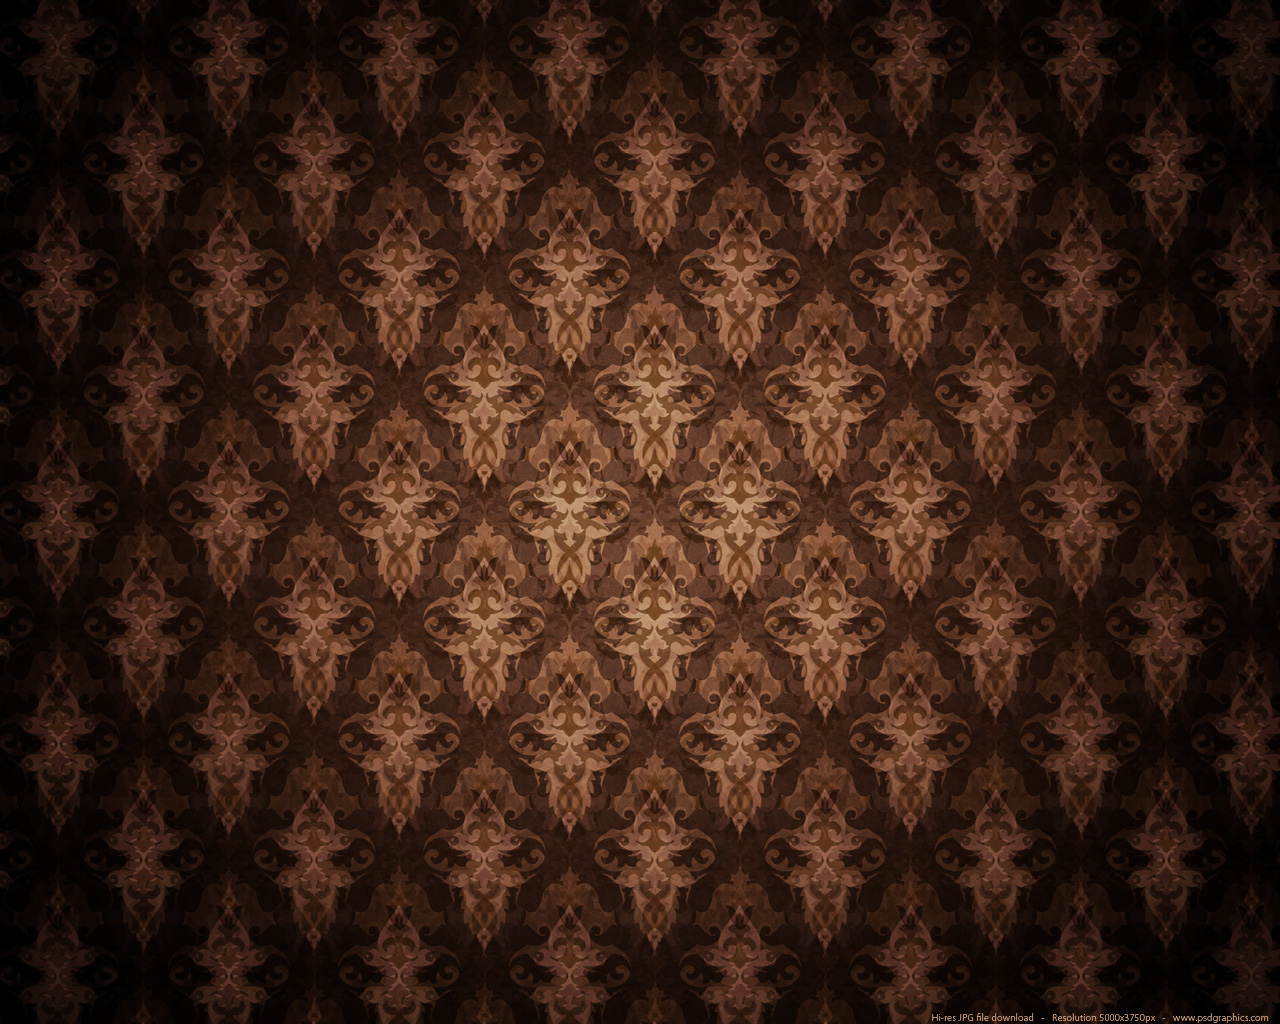 Medium size preview 1280x1024px Brown antique background